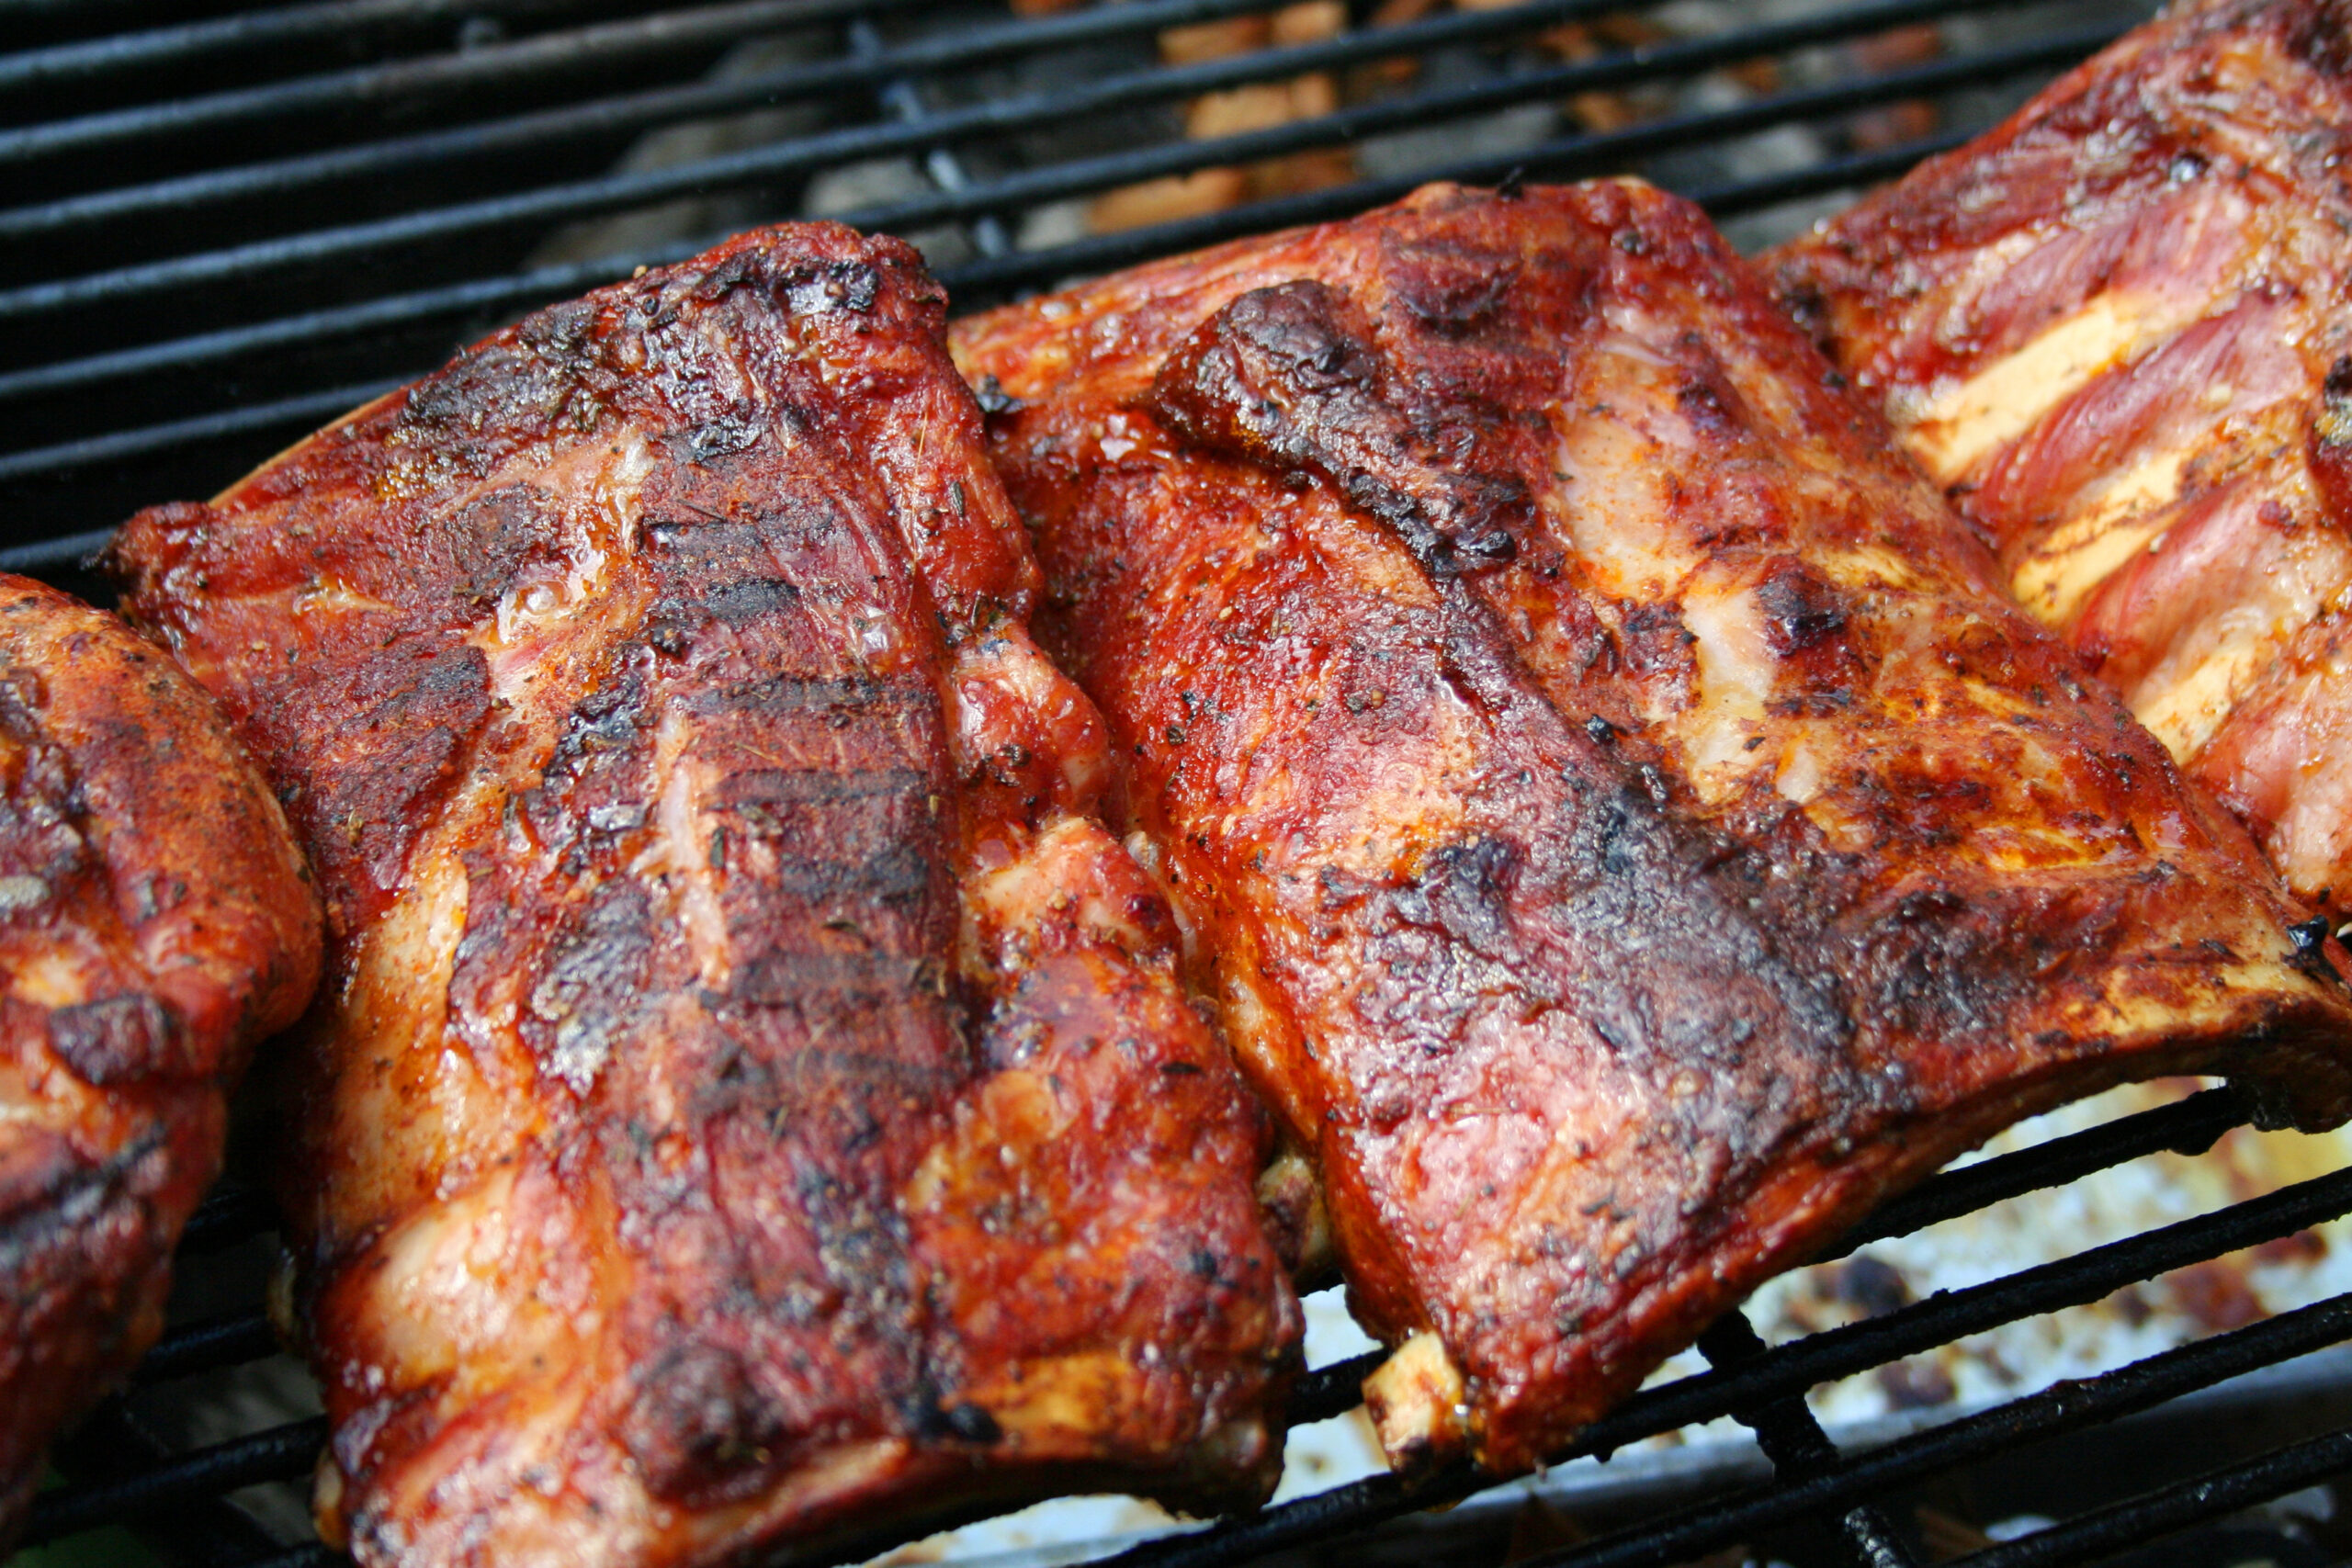 Barbecue pork ribs on a grill